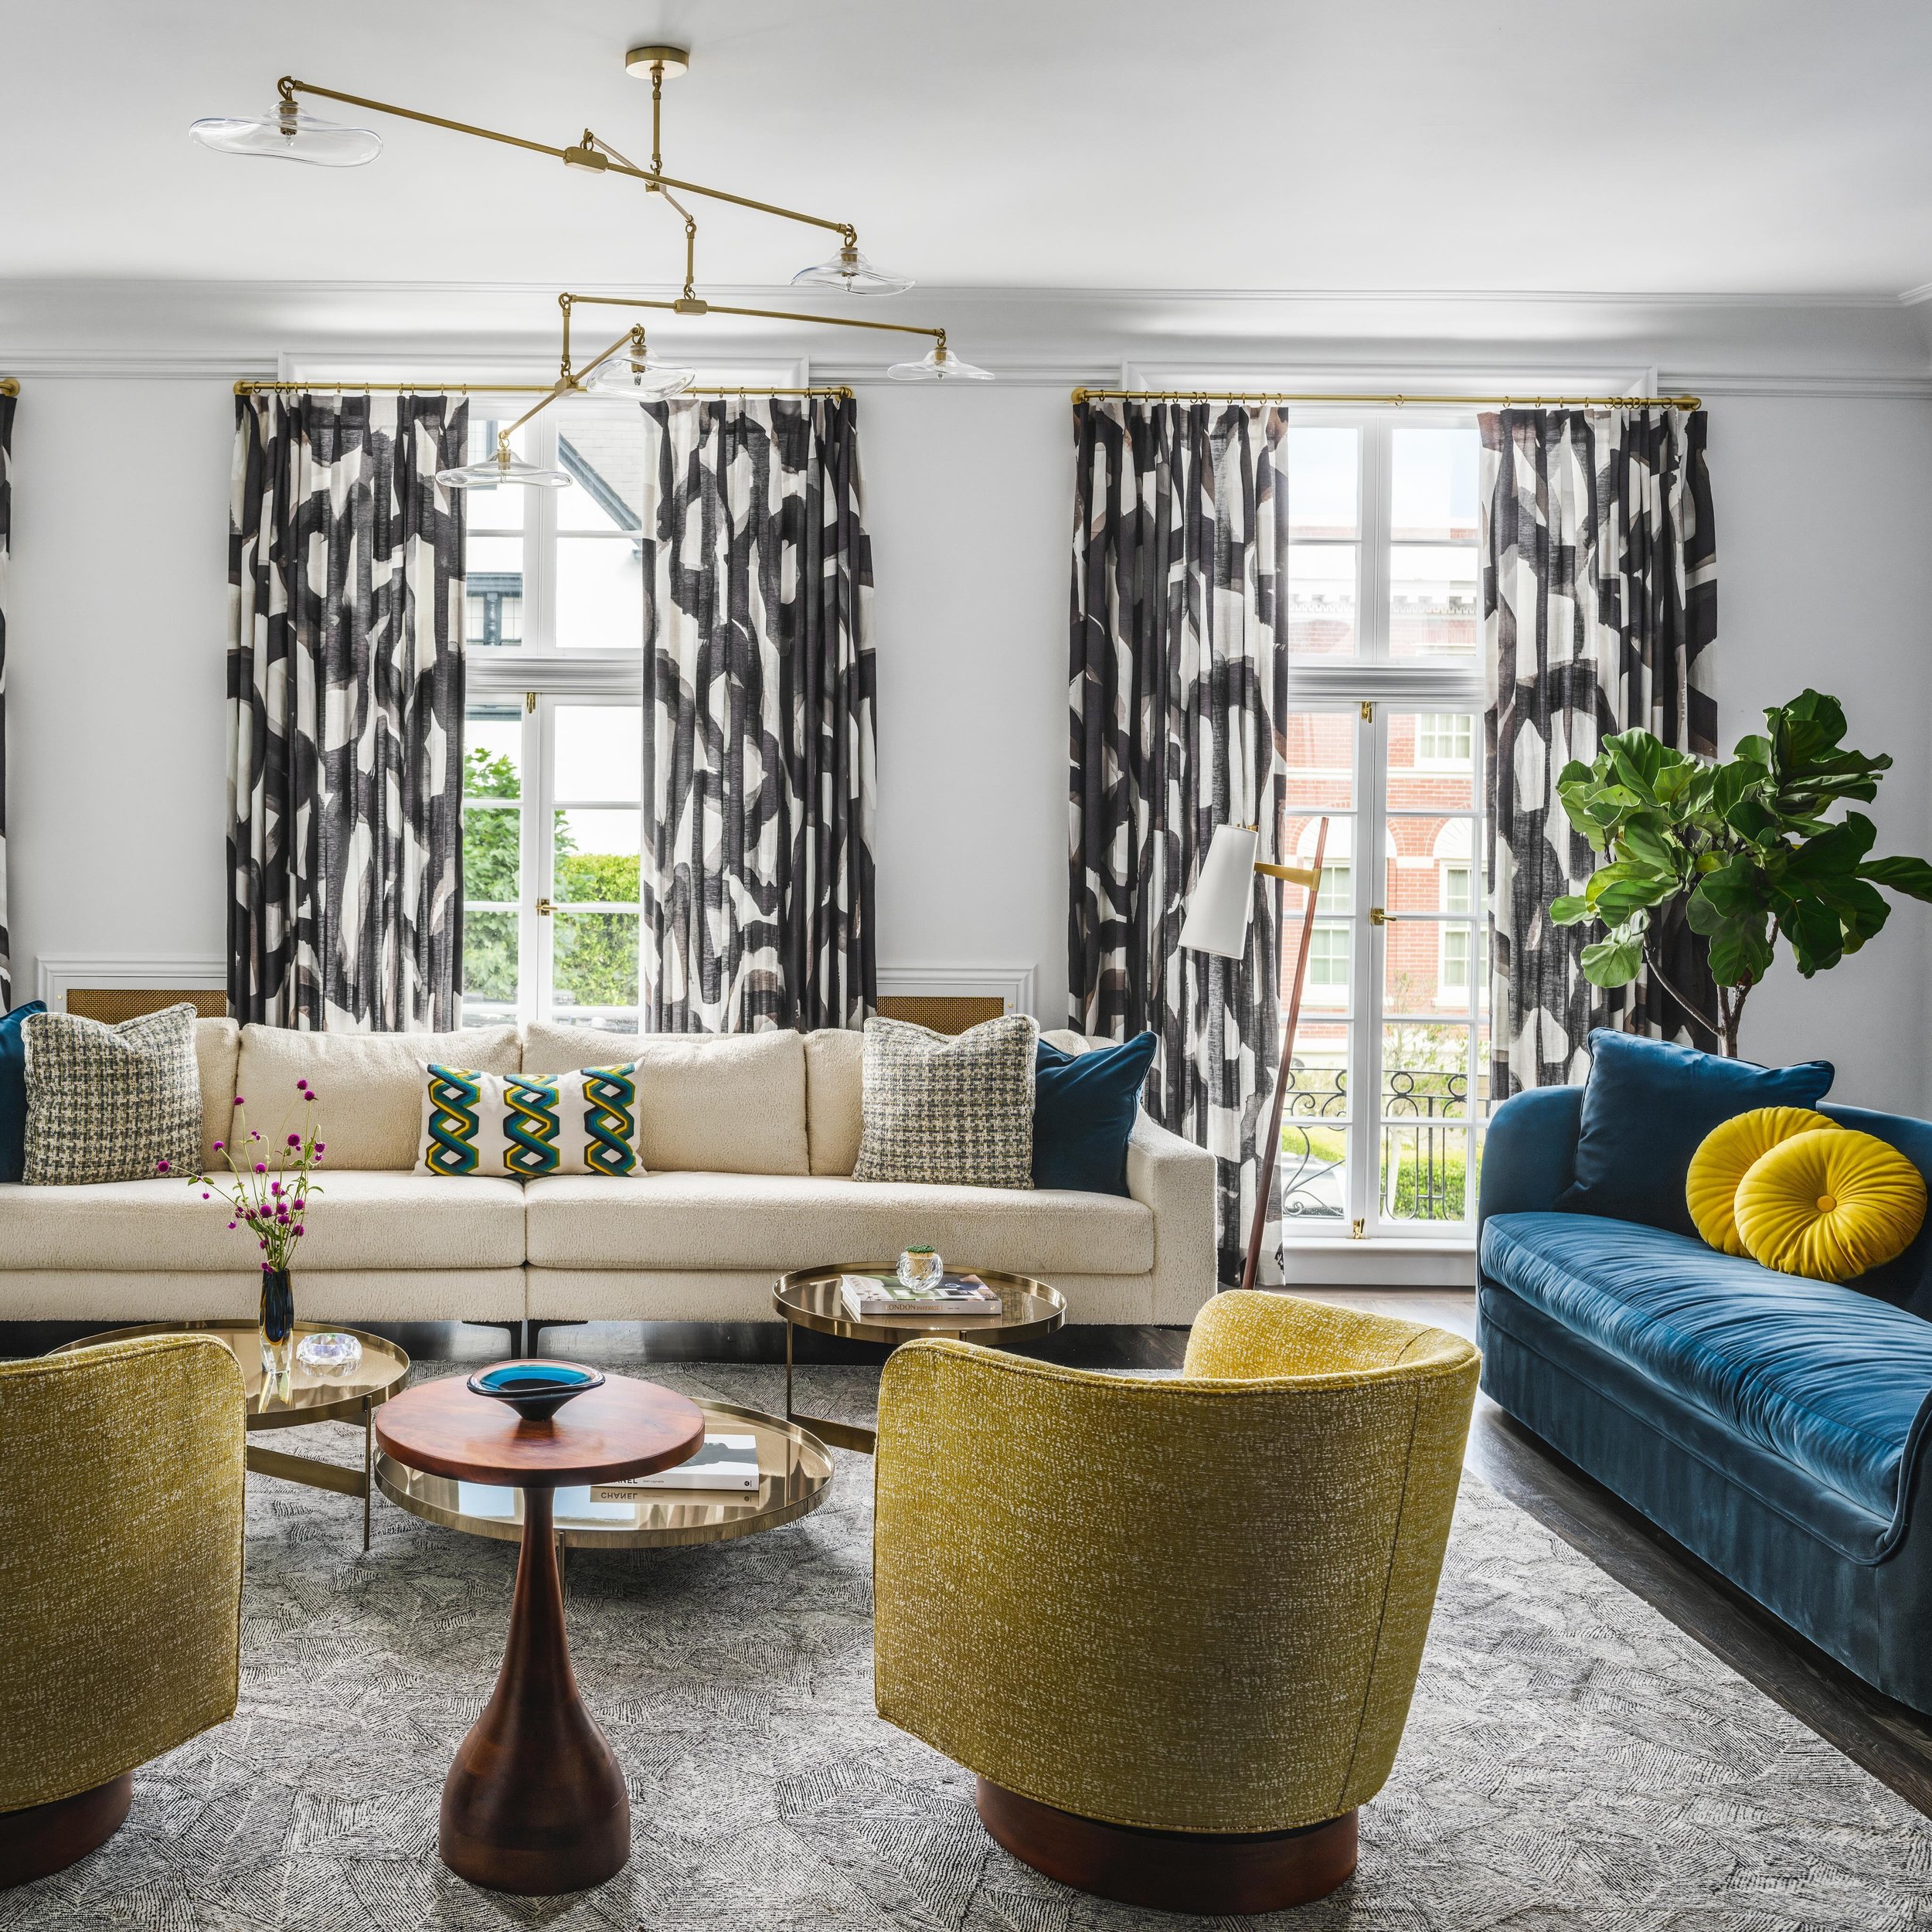 Thank you @nobhillgazette for the feature about Art and Interiors! Featuring our Beaux Arts remodel in San Francisco. https://www.nobhillgazette.com/ style_and_design/des.  #luxury #interiors #sanfranciscodesign  Architect: Doma  Builder: @s.melaugh_